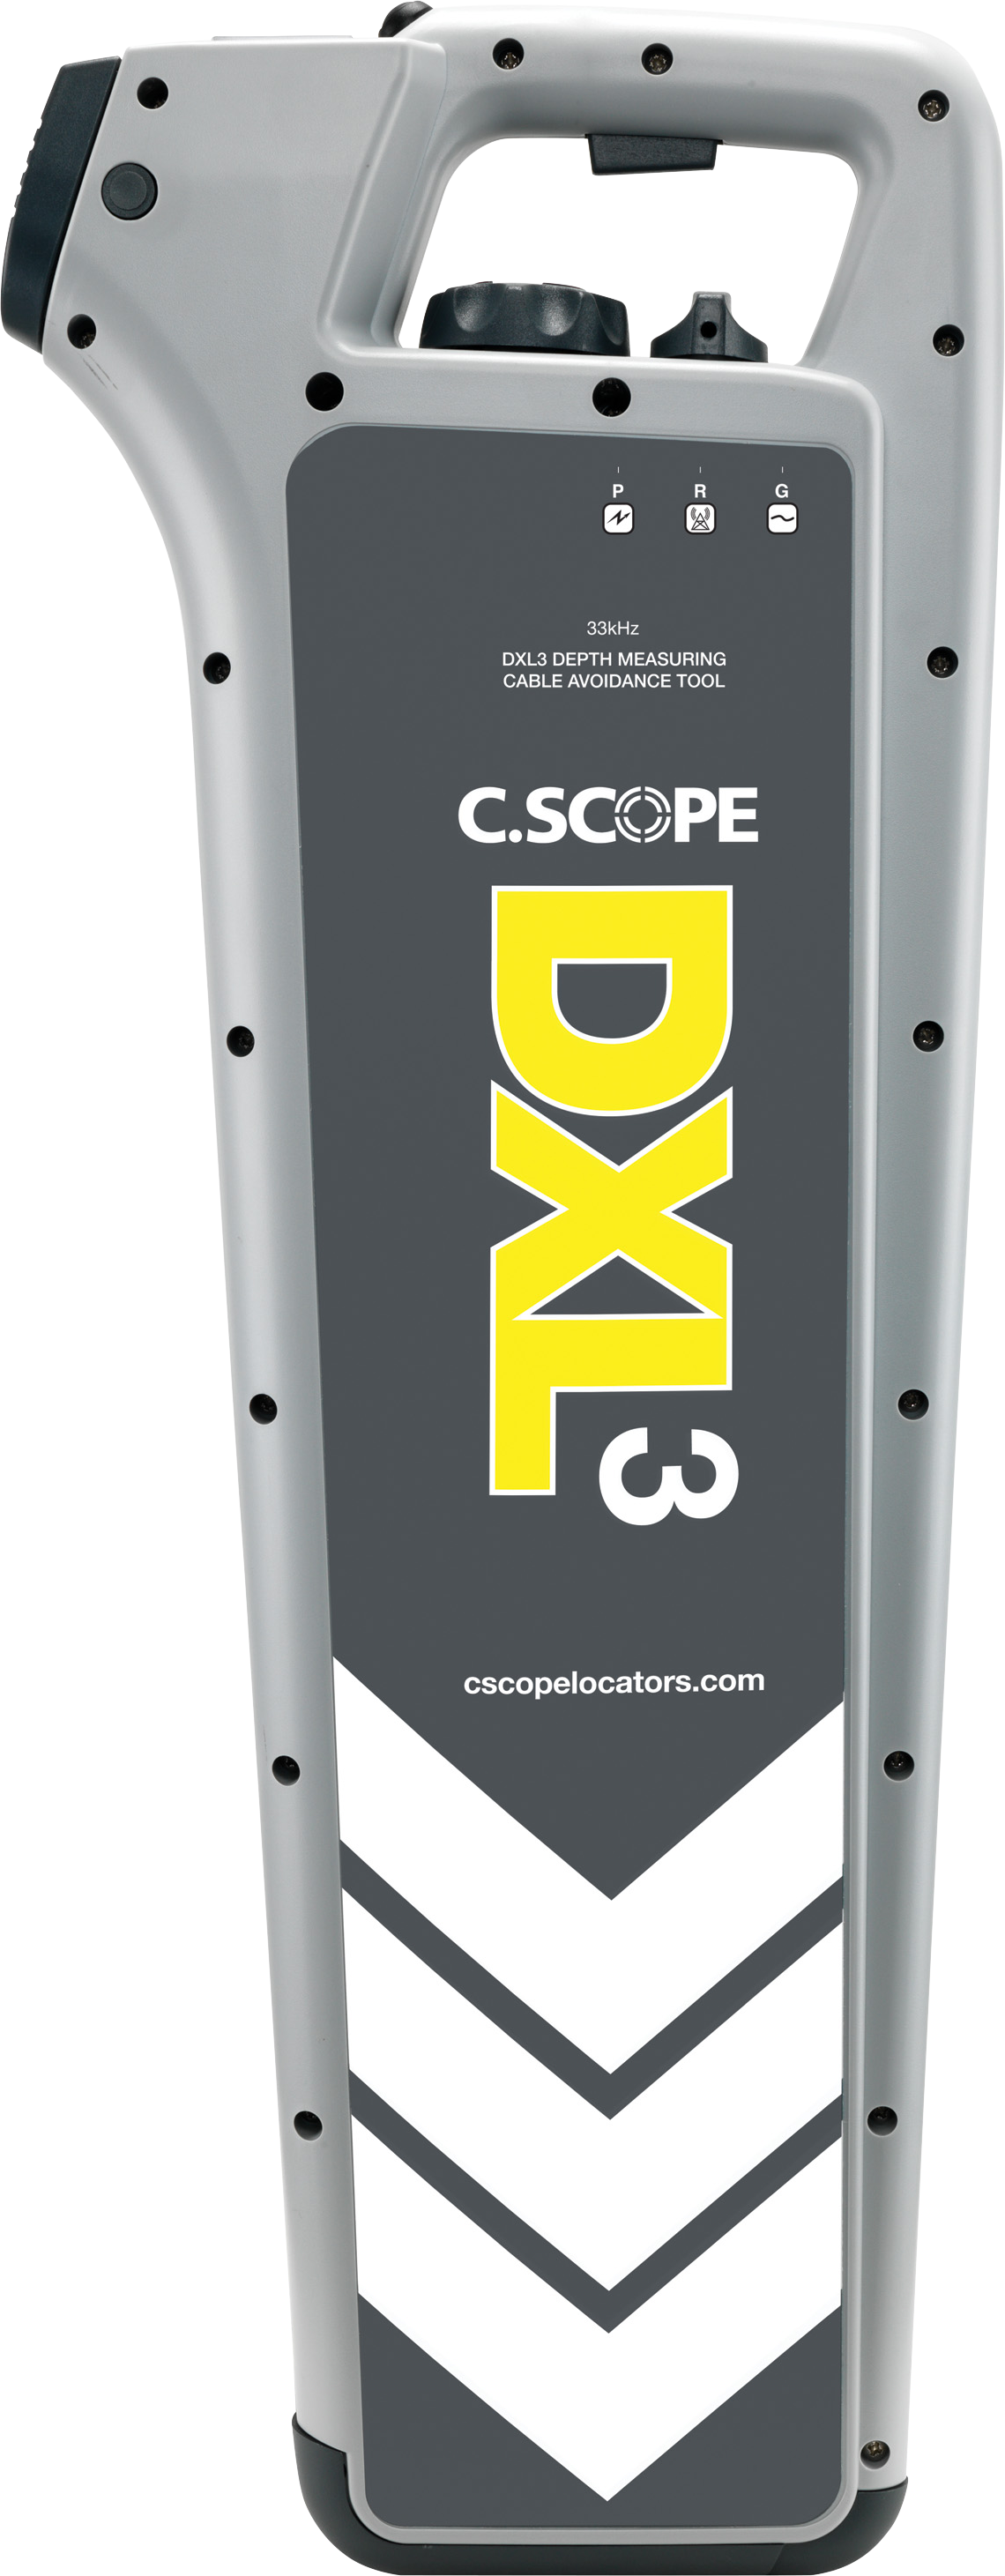 C-Scope - DXL3 Cable Avoidance Tool